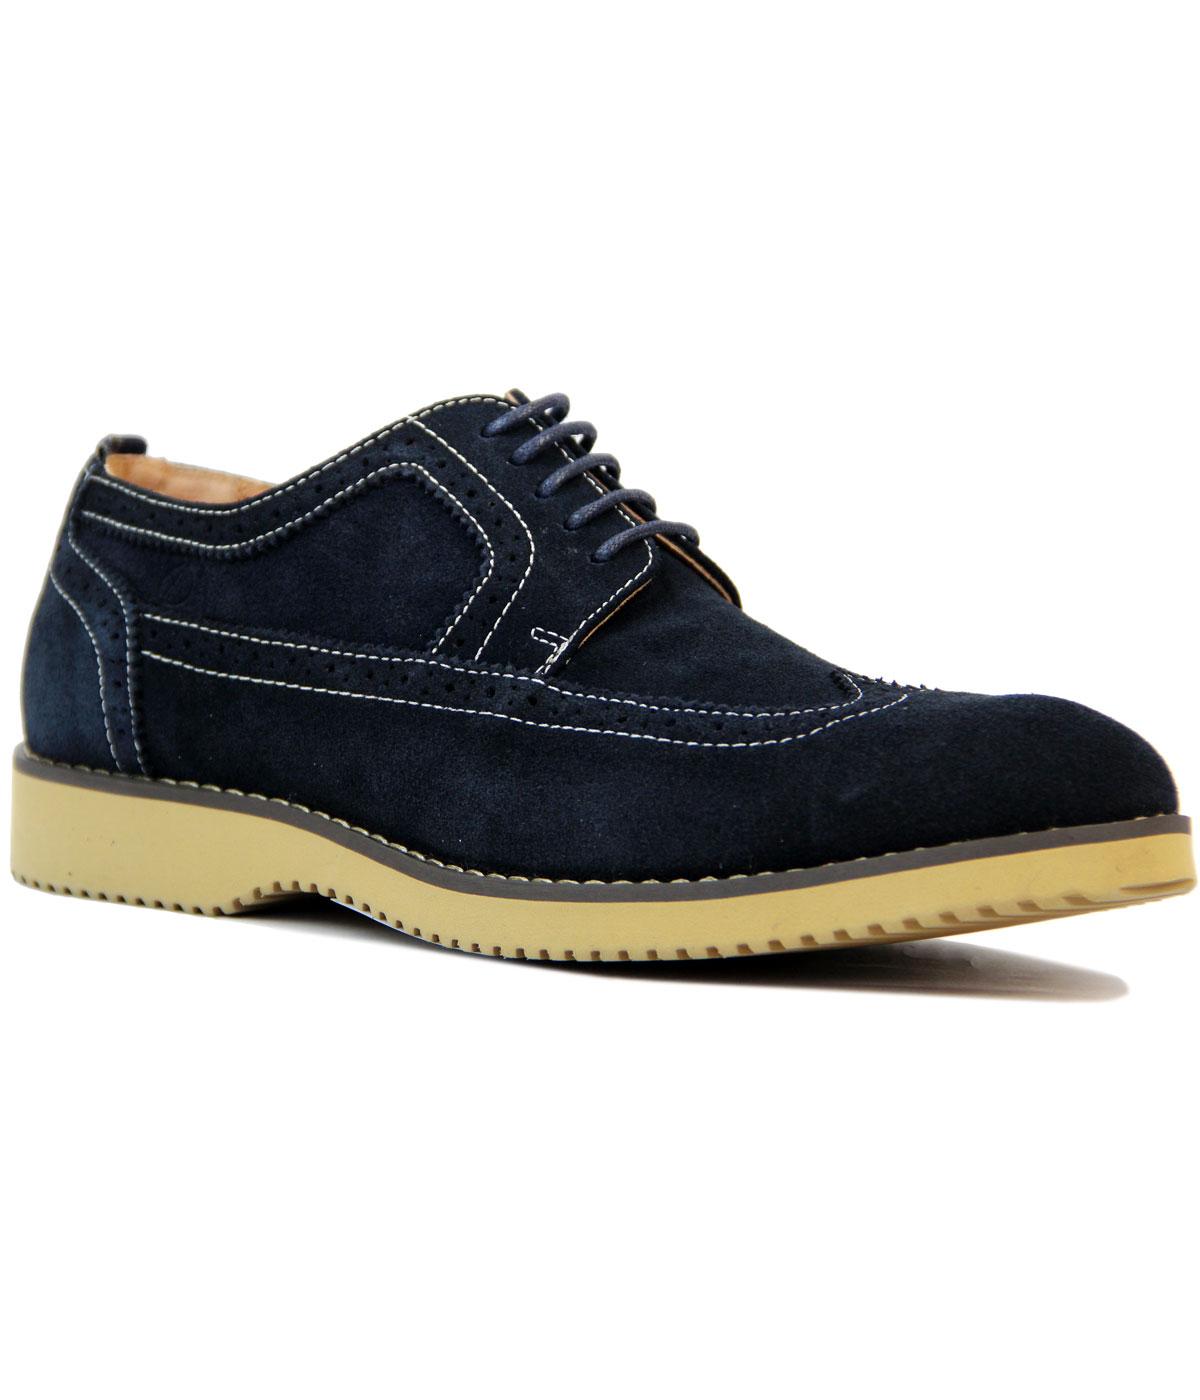 Turnmill PETER WERTH Retro Mod Navy Suede Brogues